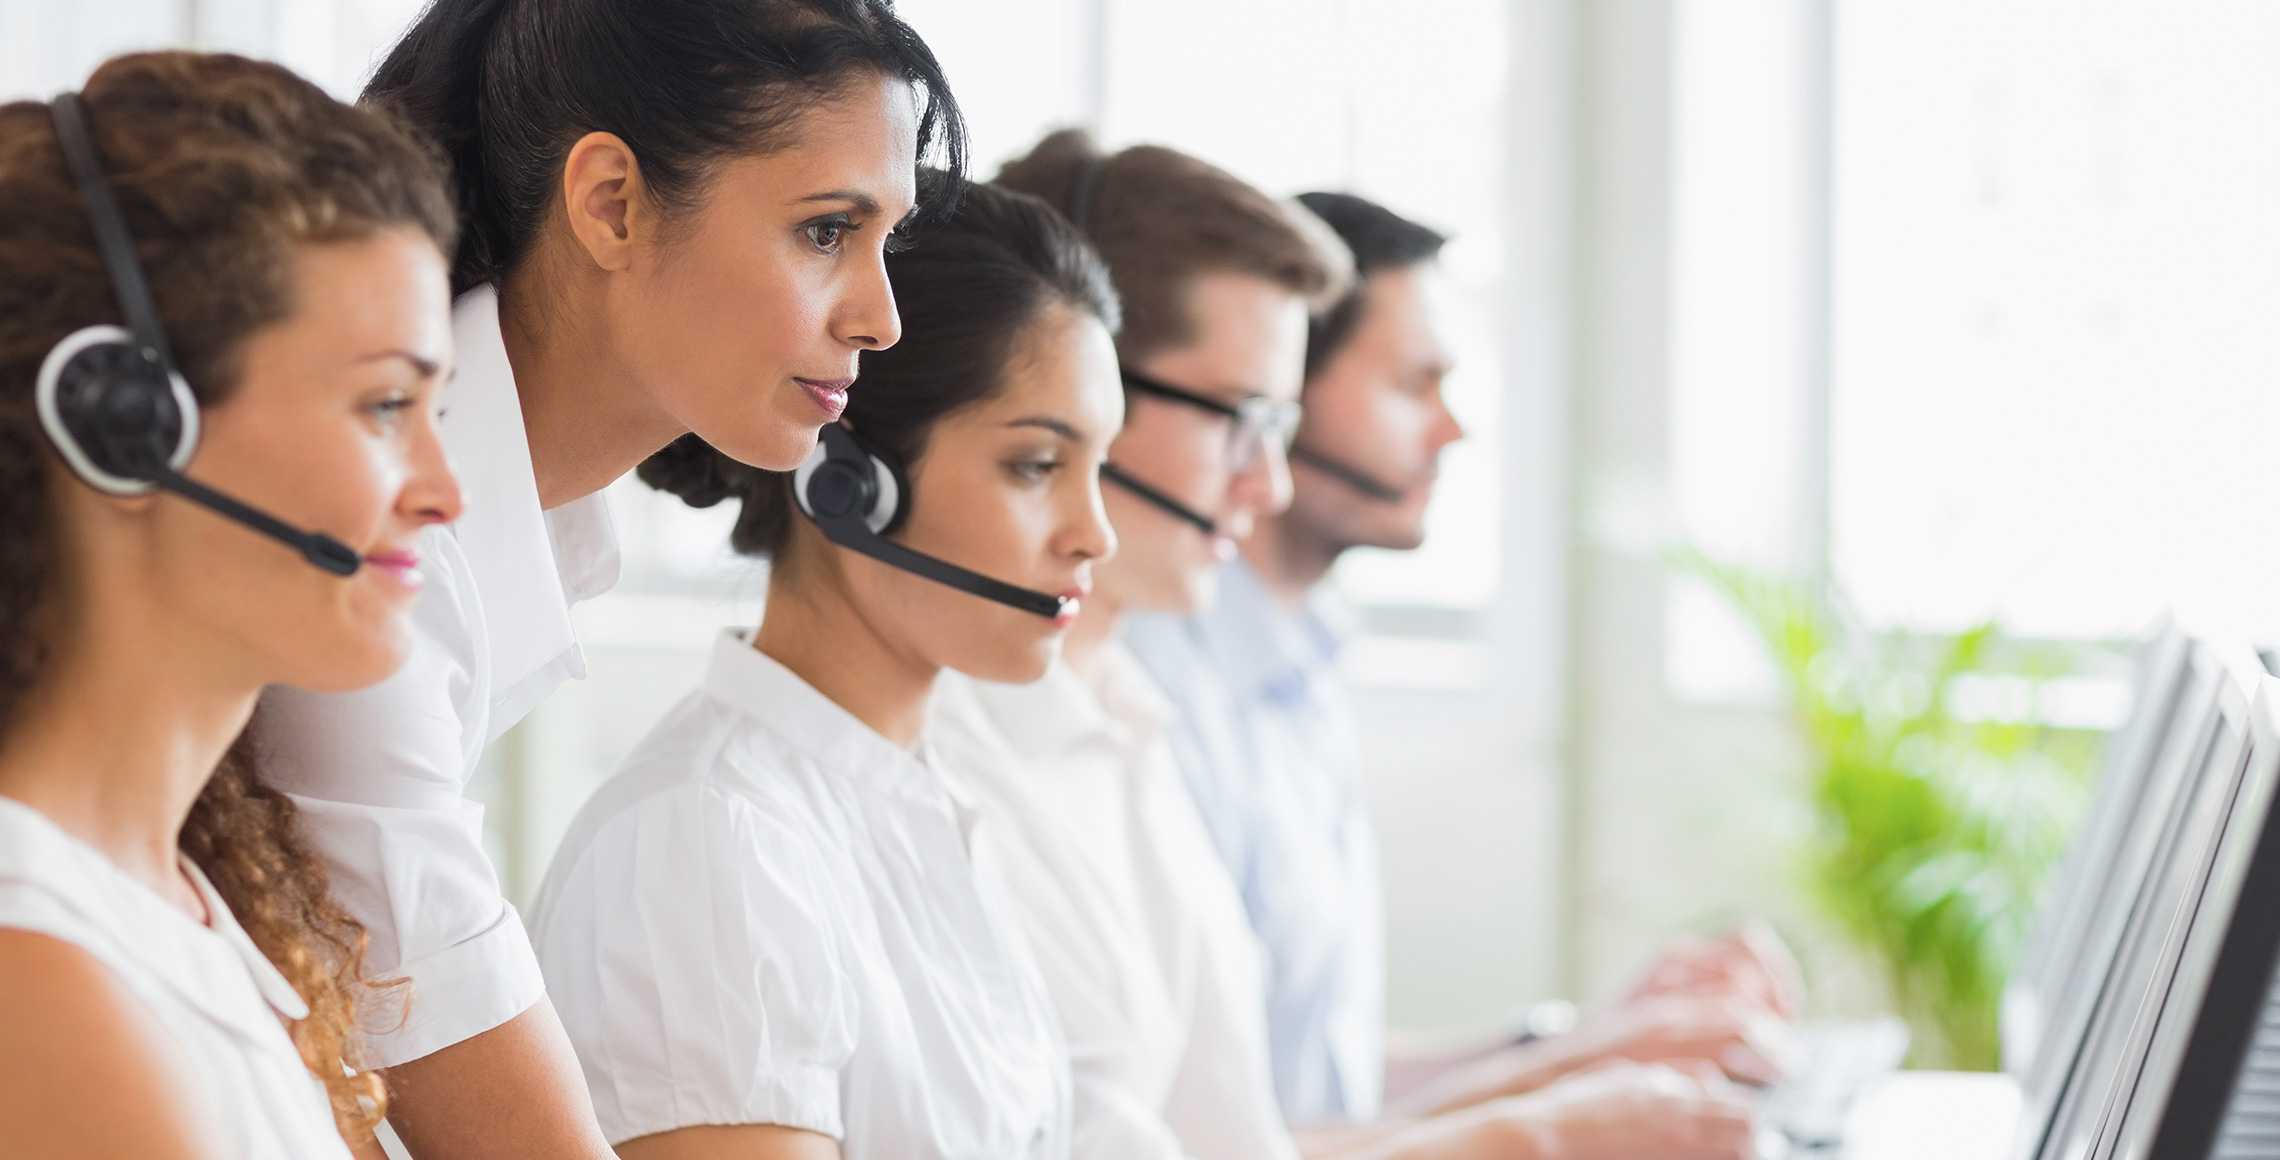 How to calculate call center agent turnover rate